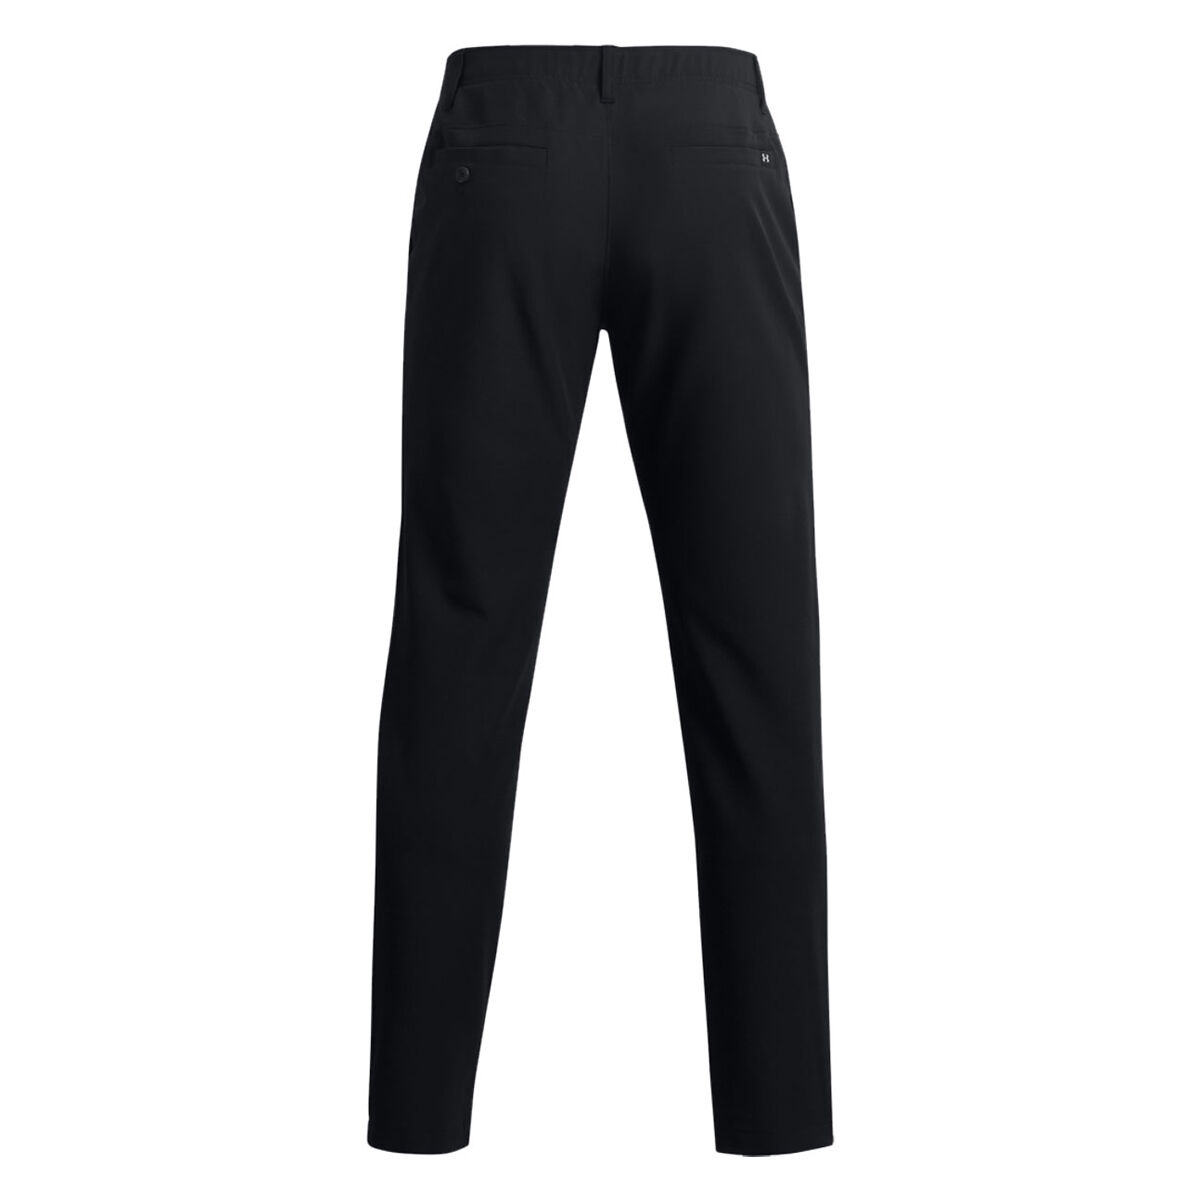 Under Armour Ua Squad 3.0 Warm-up Pants in Red